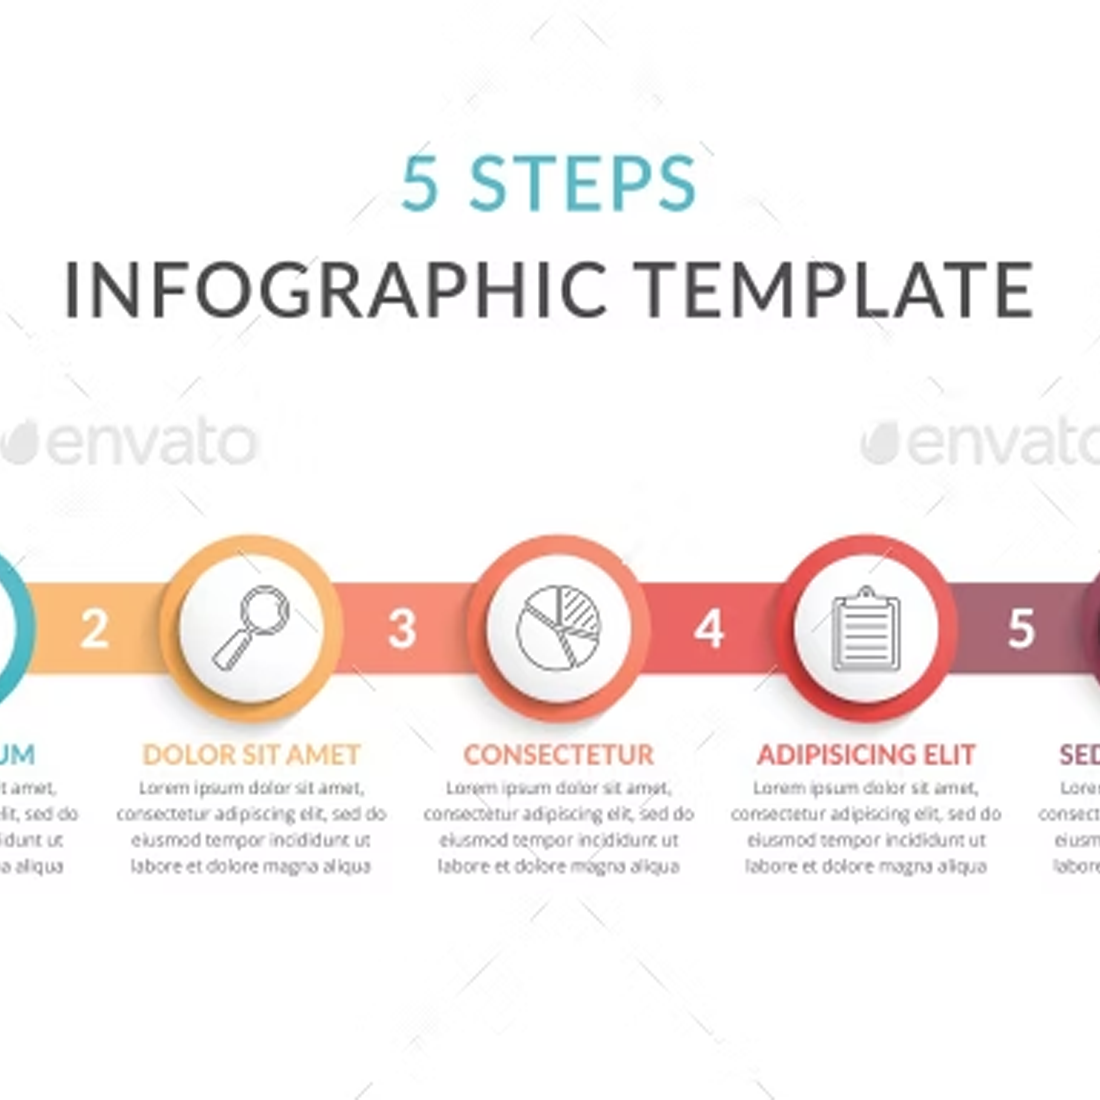 Images preview 5 steps infographic template.